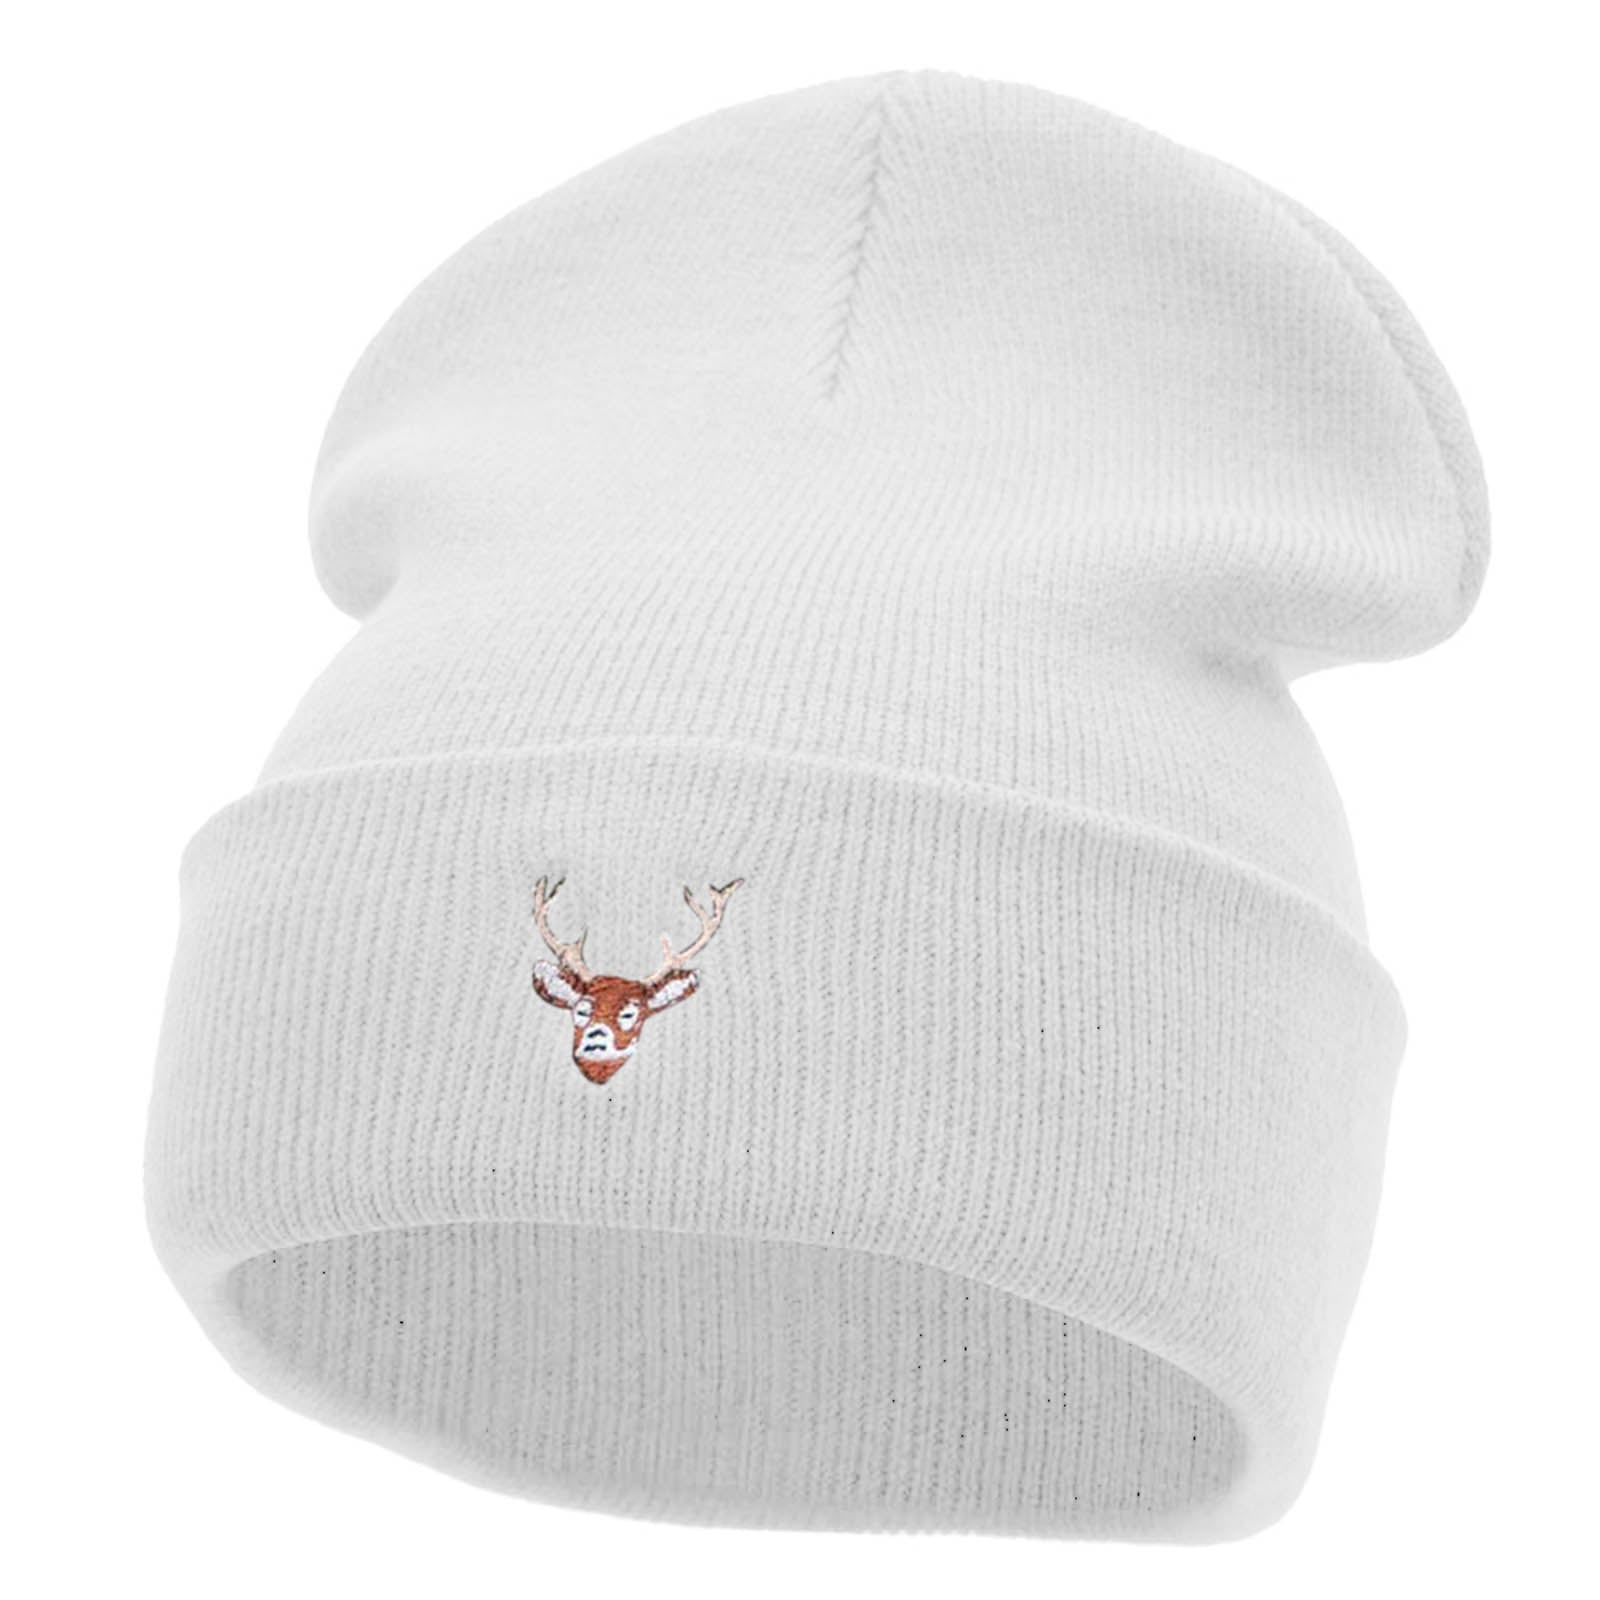 Mini Stag Embroidered 12 Inch Long Knitted Beanie - White OSFM